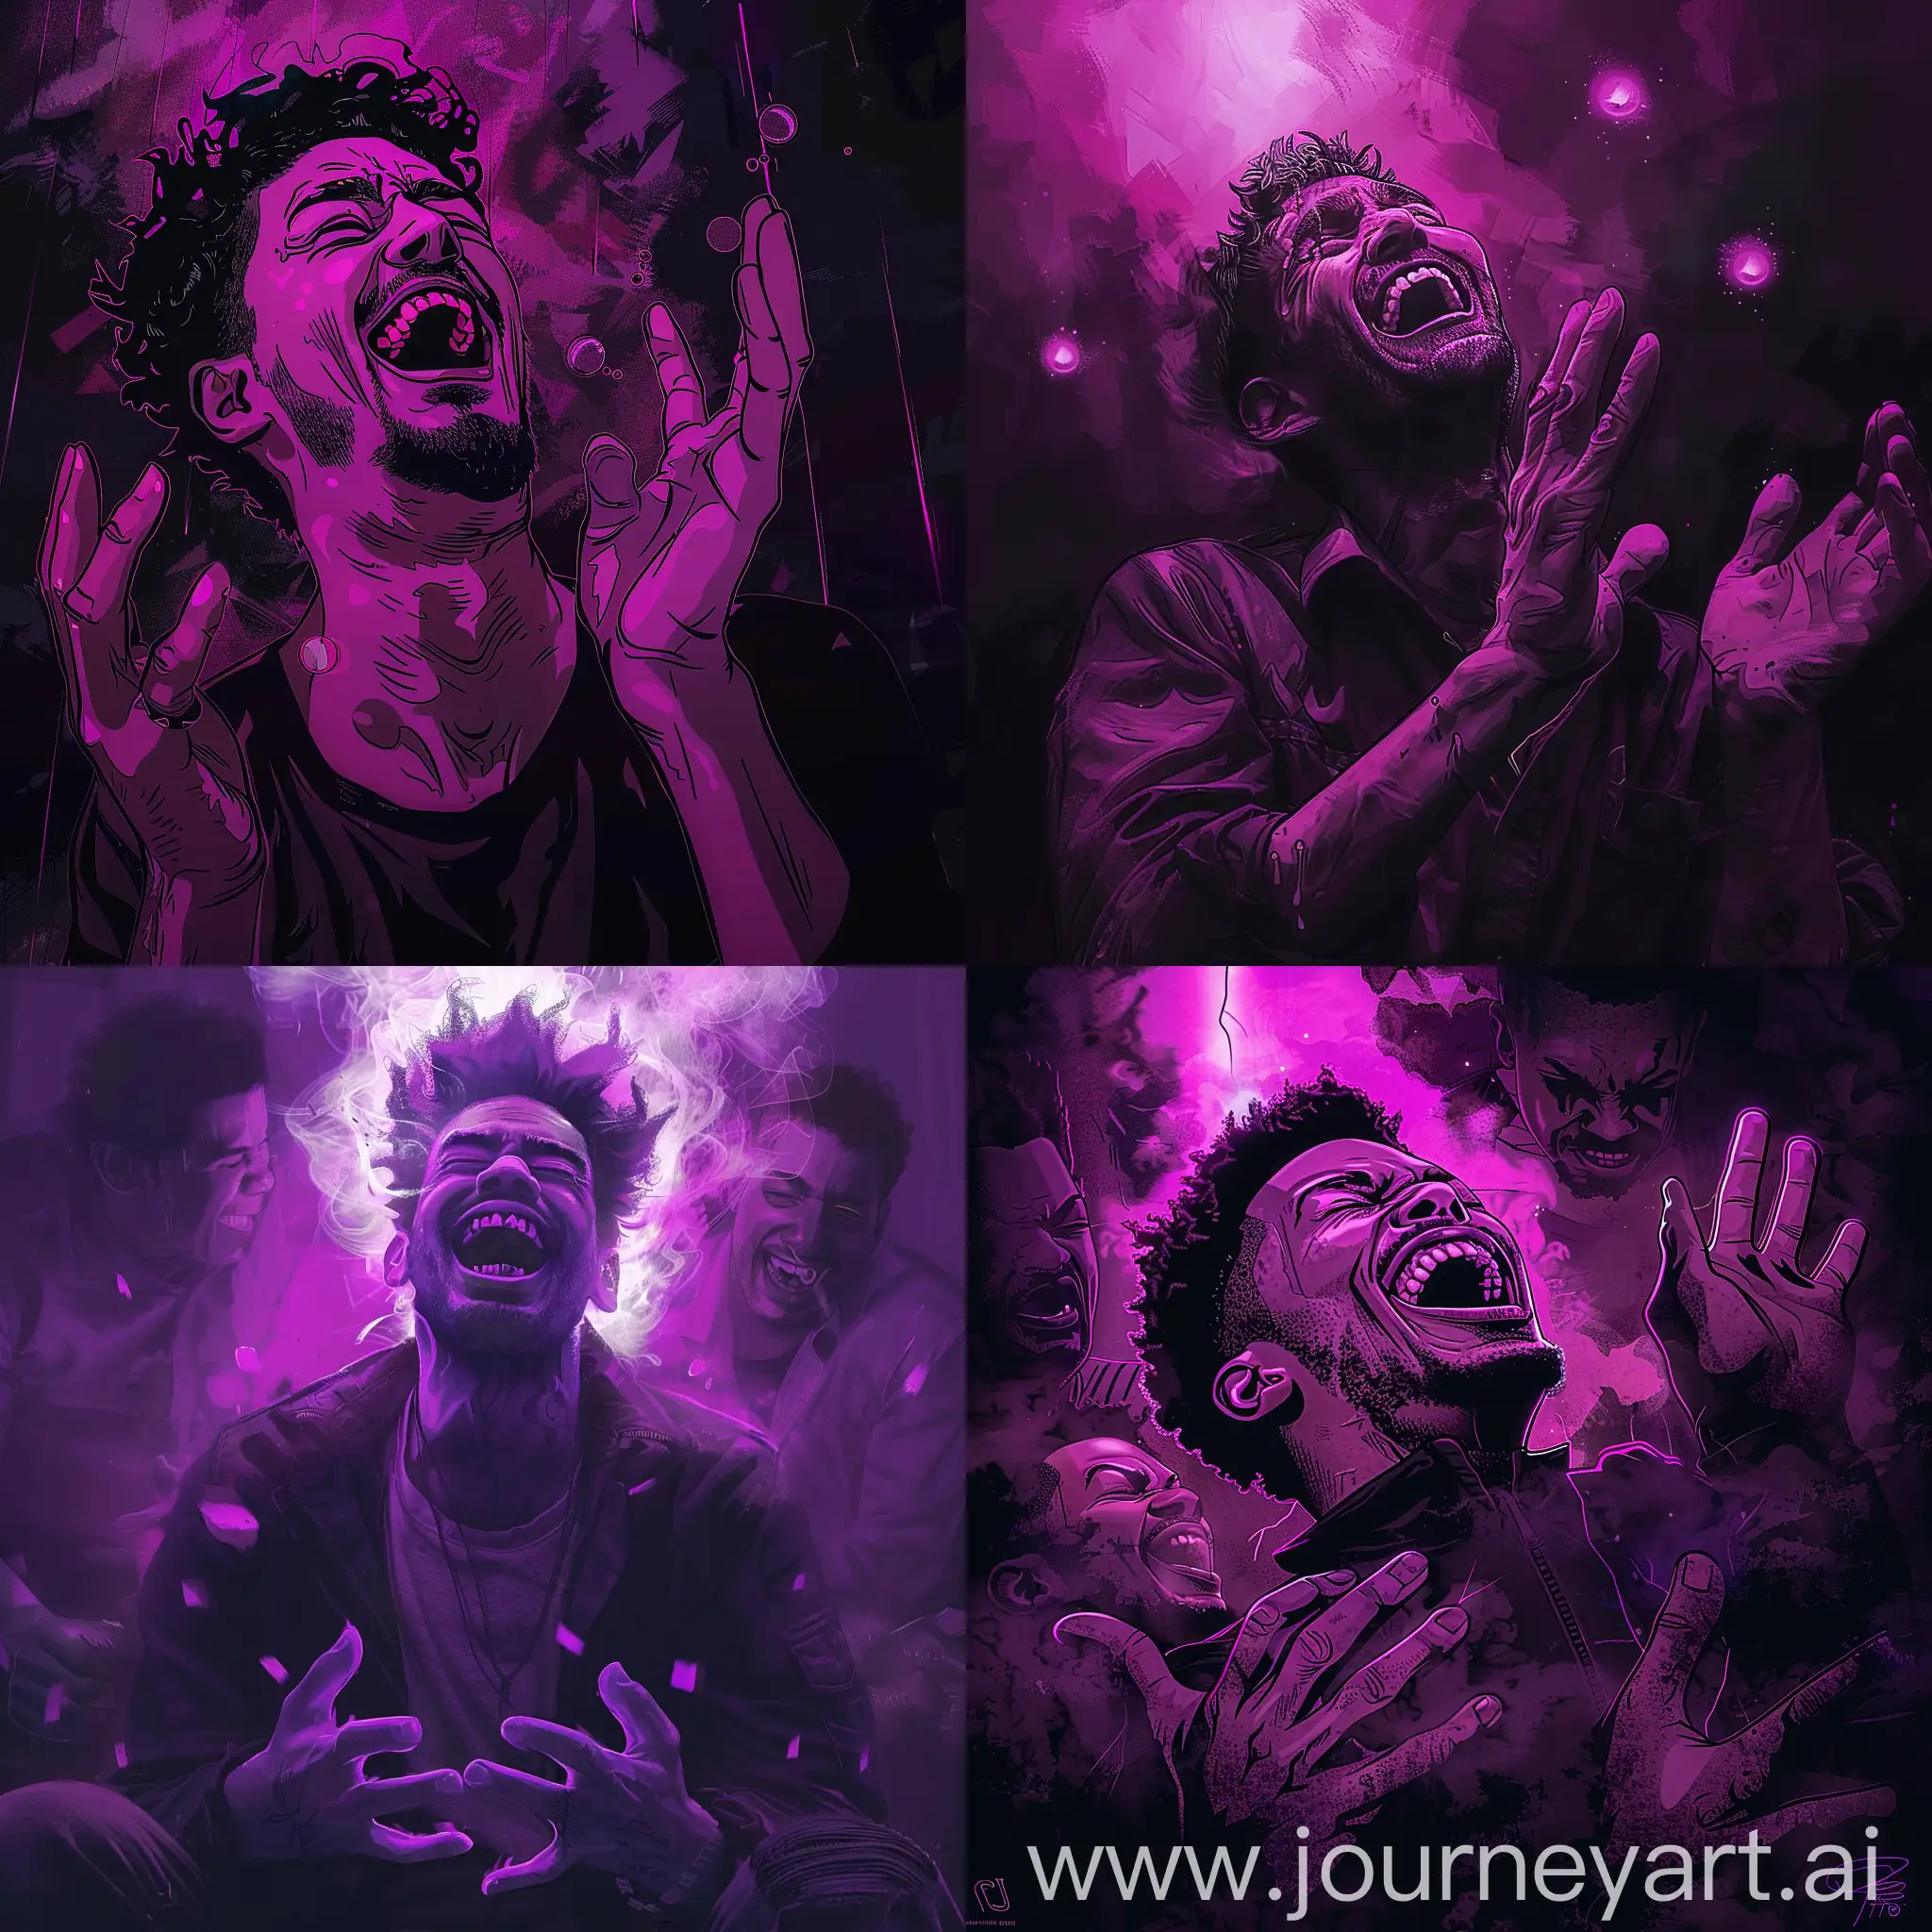 Mysterious-Laughter-Digital-Art-of-Three-Mafia-Figures-in-a-Dark-Atmosphere